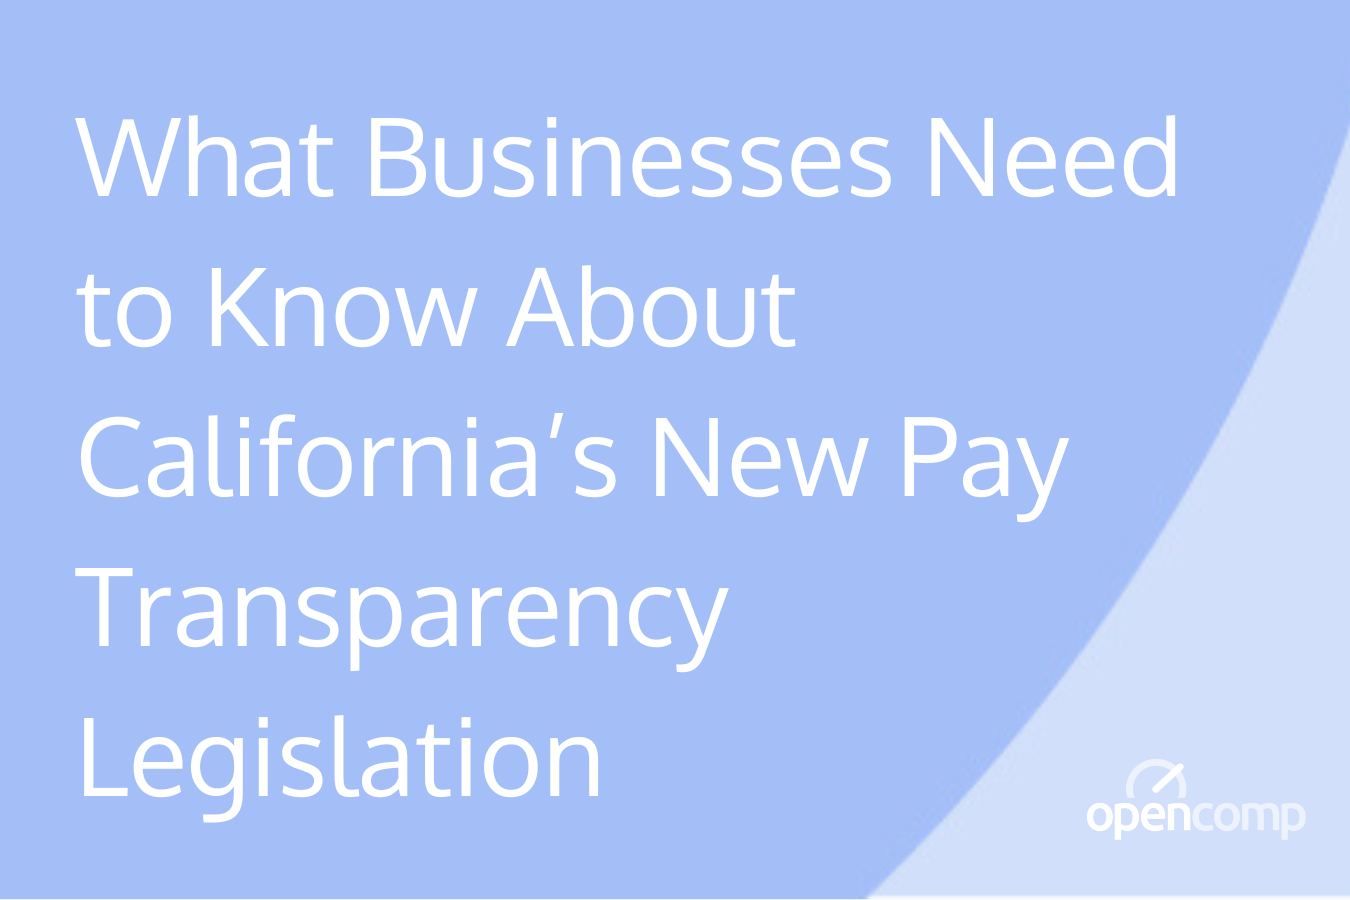 What Businesses Need to Know About Californias New Pay Transparency Legislation